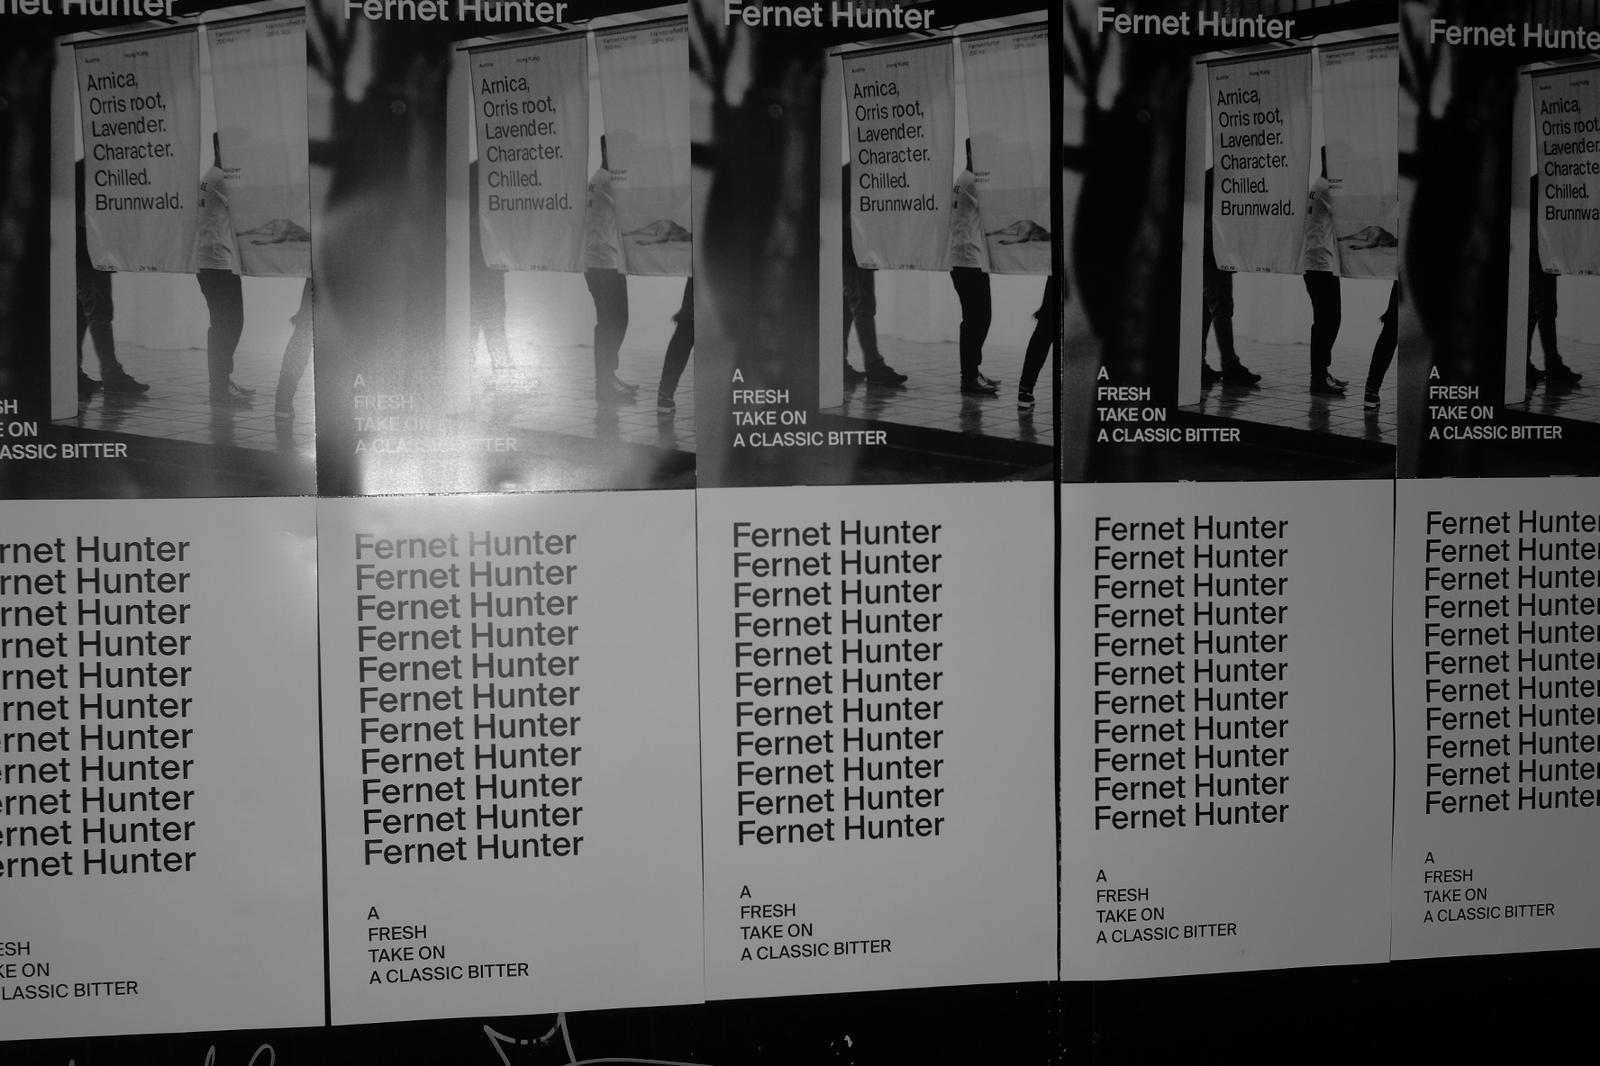 Banner to promote the launch of Fernet Hunter in Korea